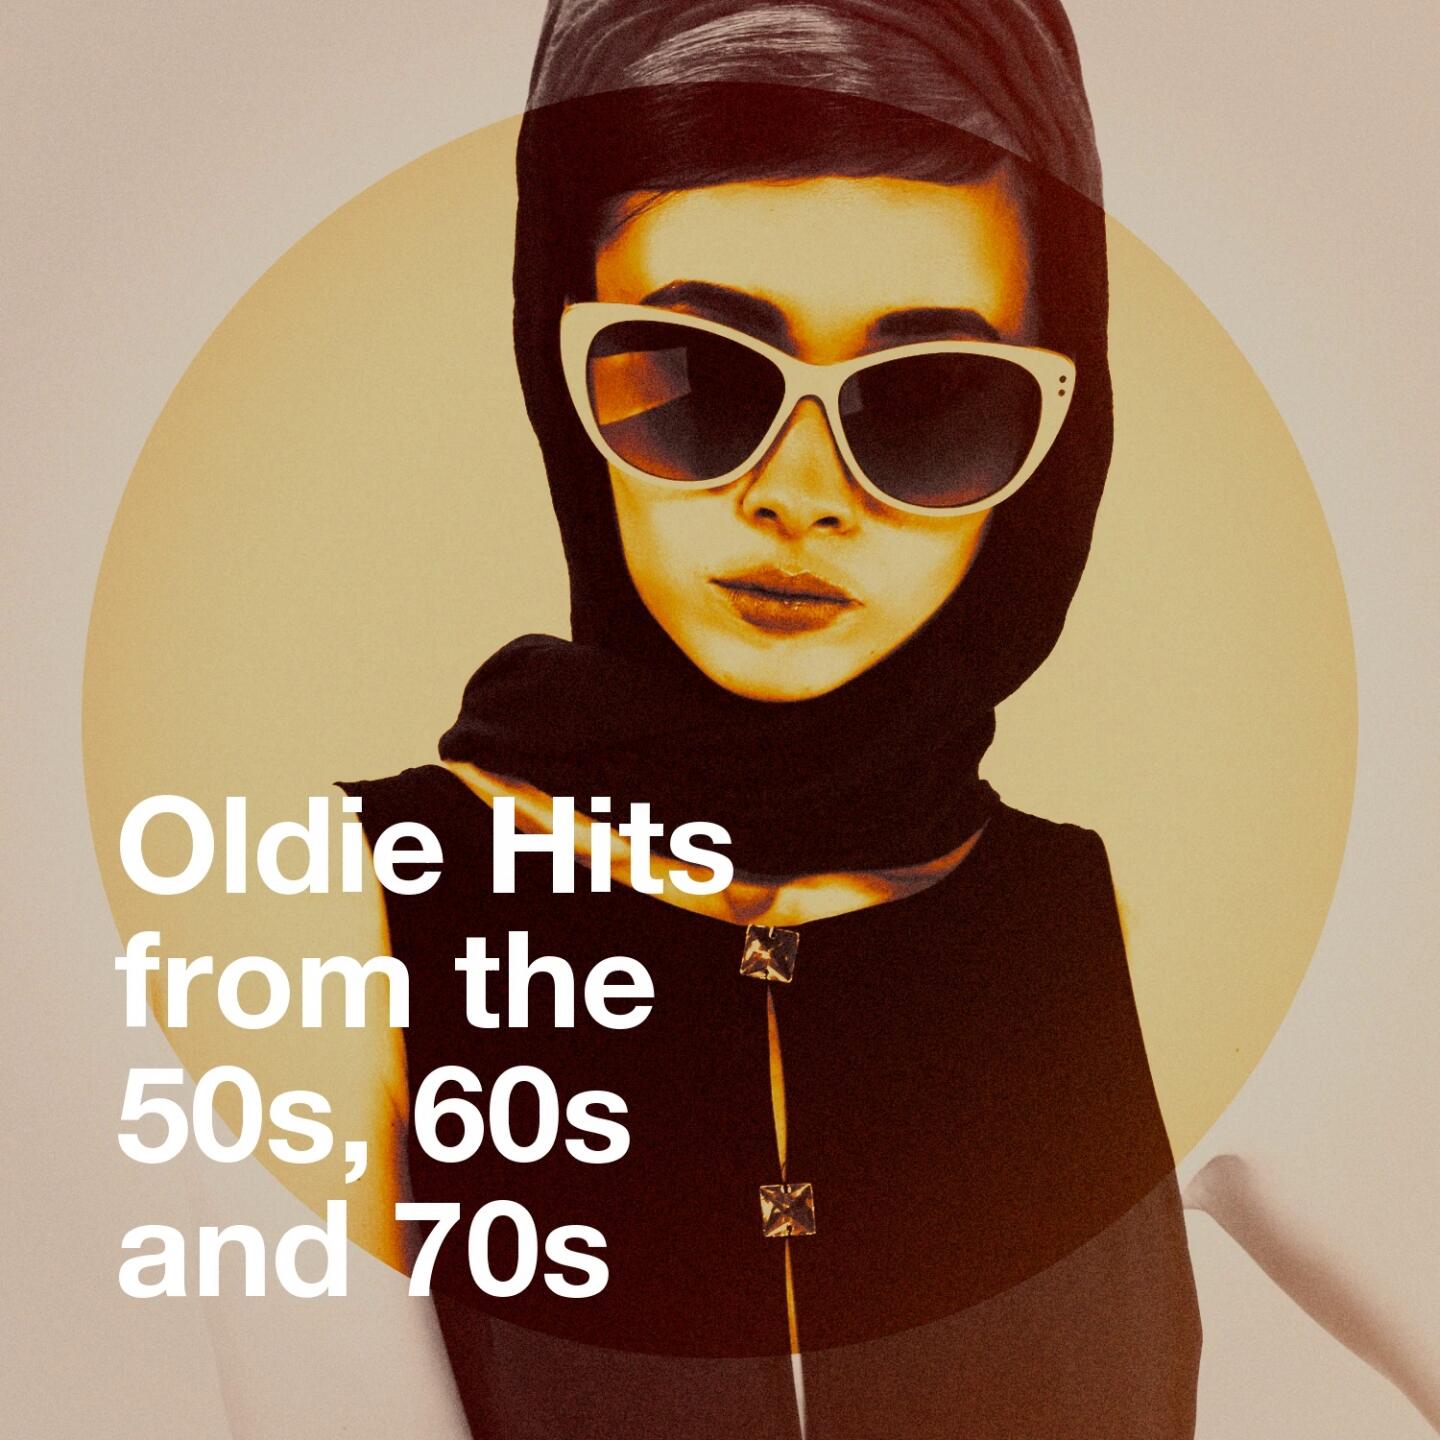 60s Rock All Stars - Oldie Hits from the 50s, 60s and 70s | iHeart